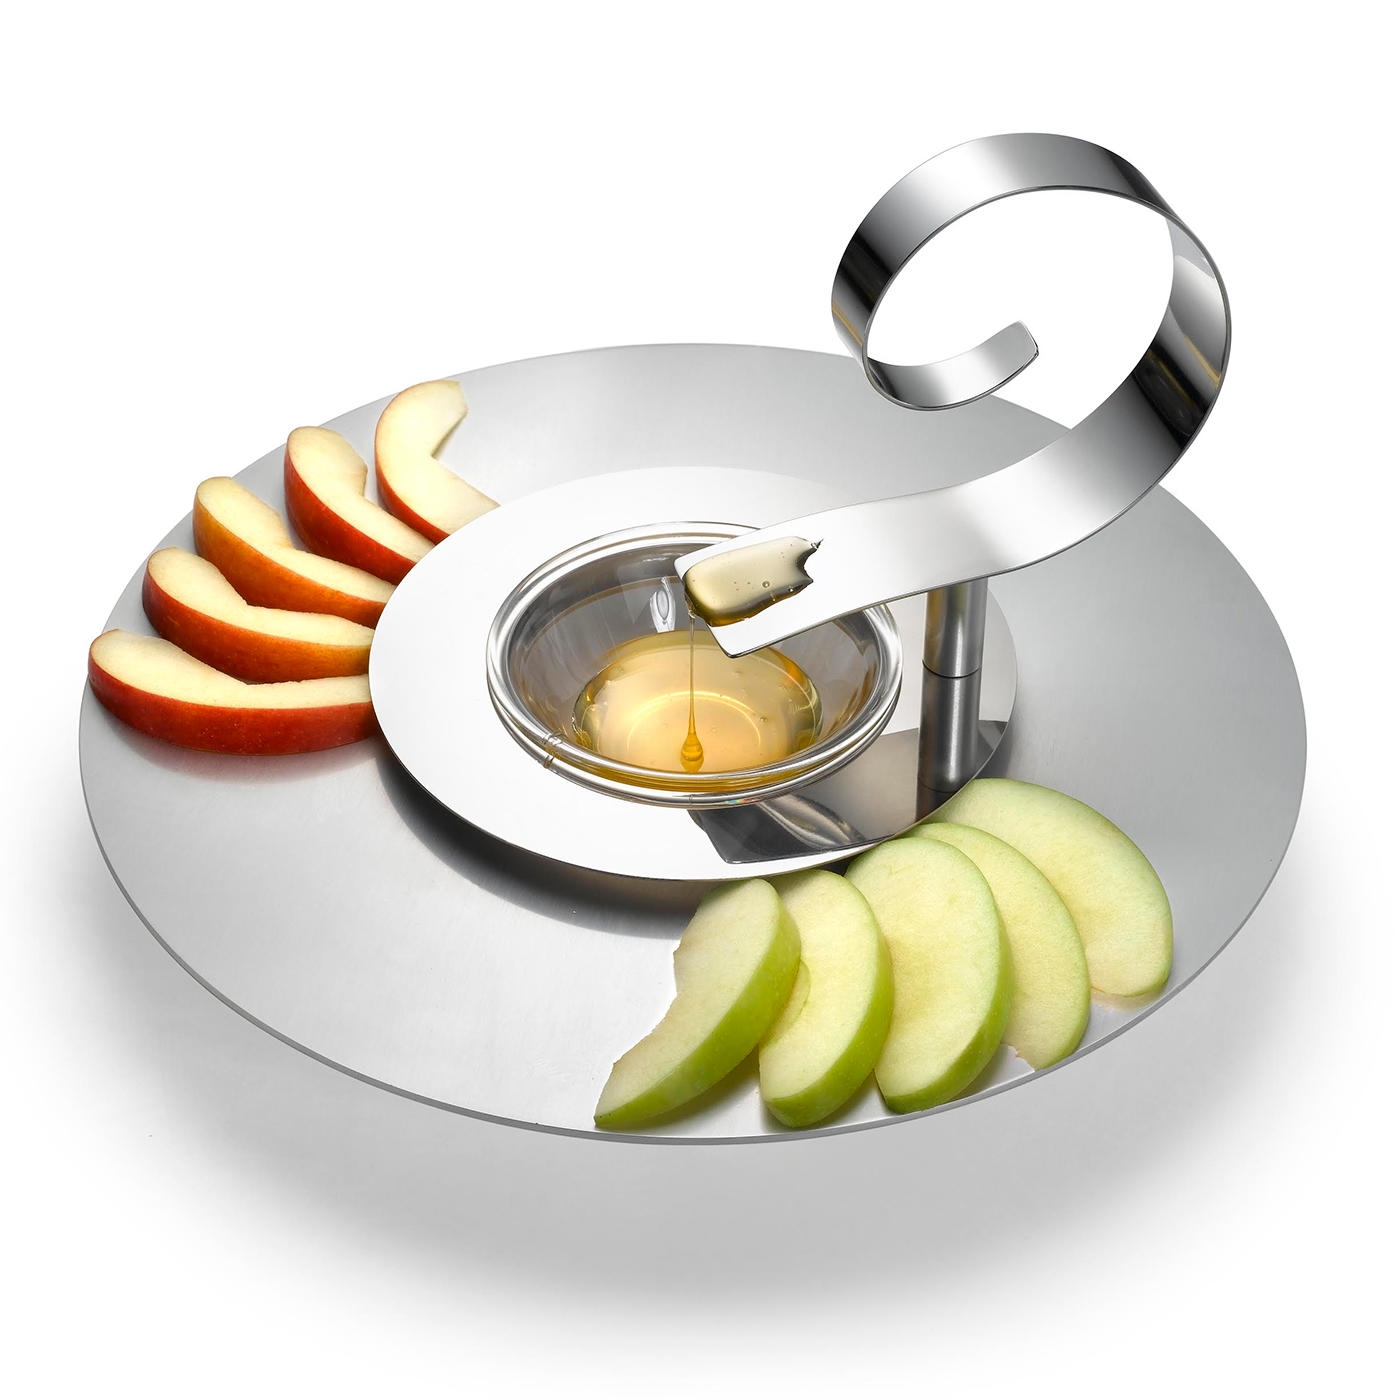 Laura Cowan Stainless Steel and Aluminum Spiral Apple and Honey Plate - 3